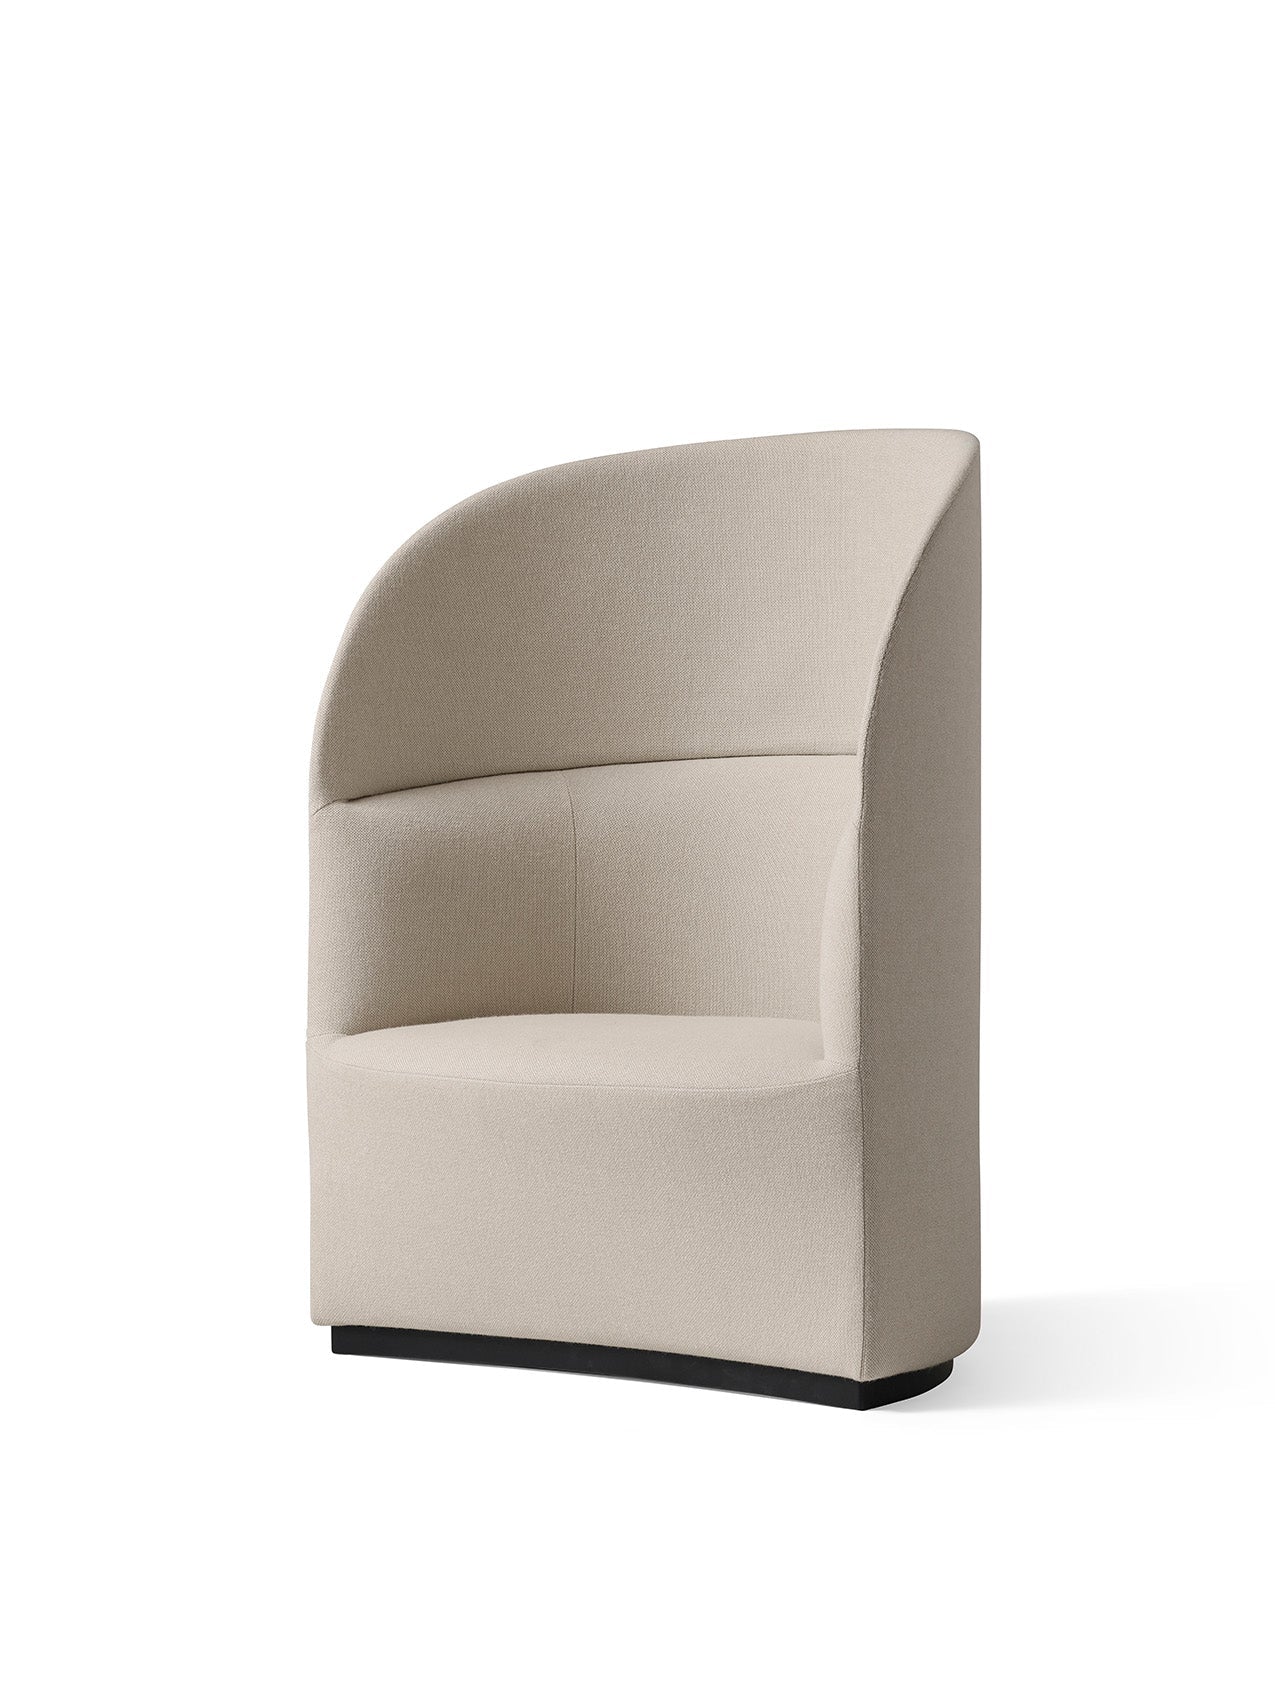 Tearoom, Lounge Chair, High Back w/US Power Outlet-Lounge Chair-MENU Design Shop